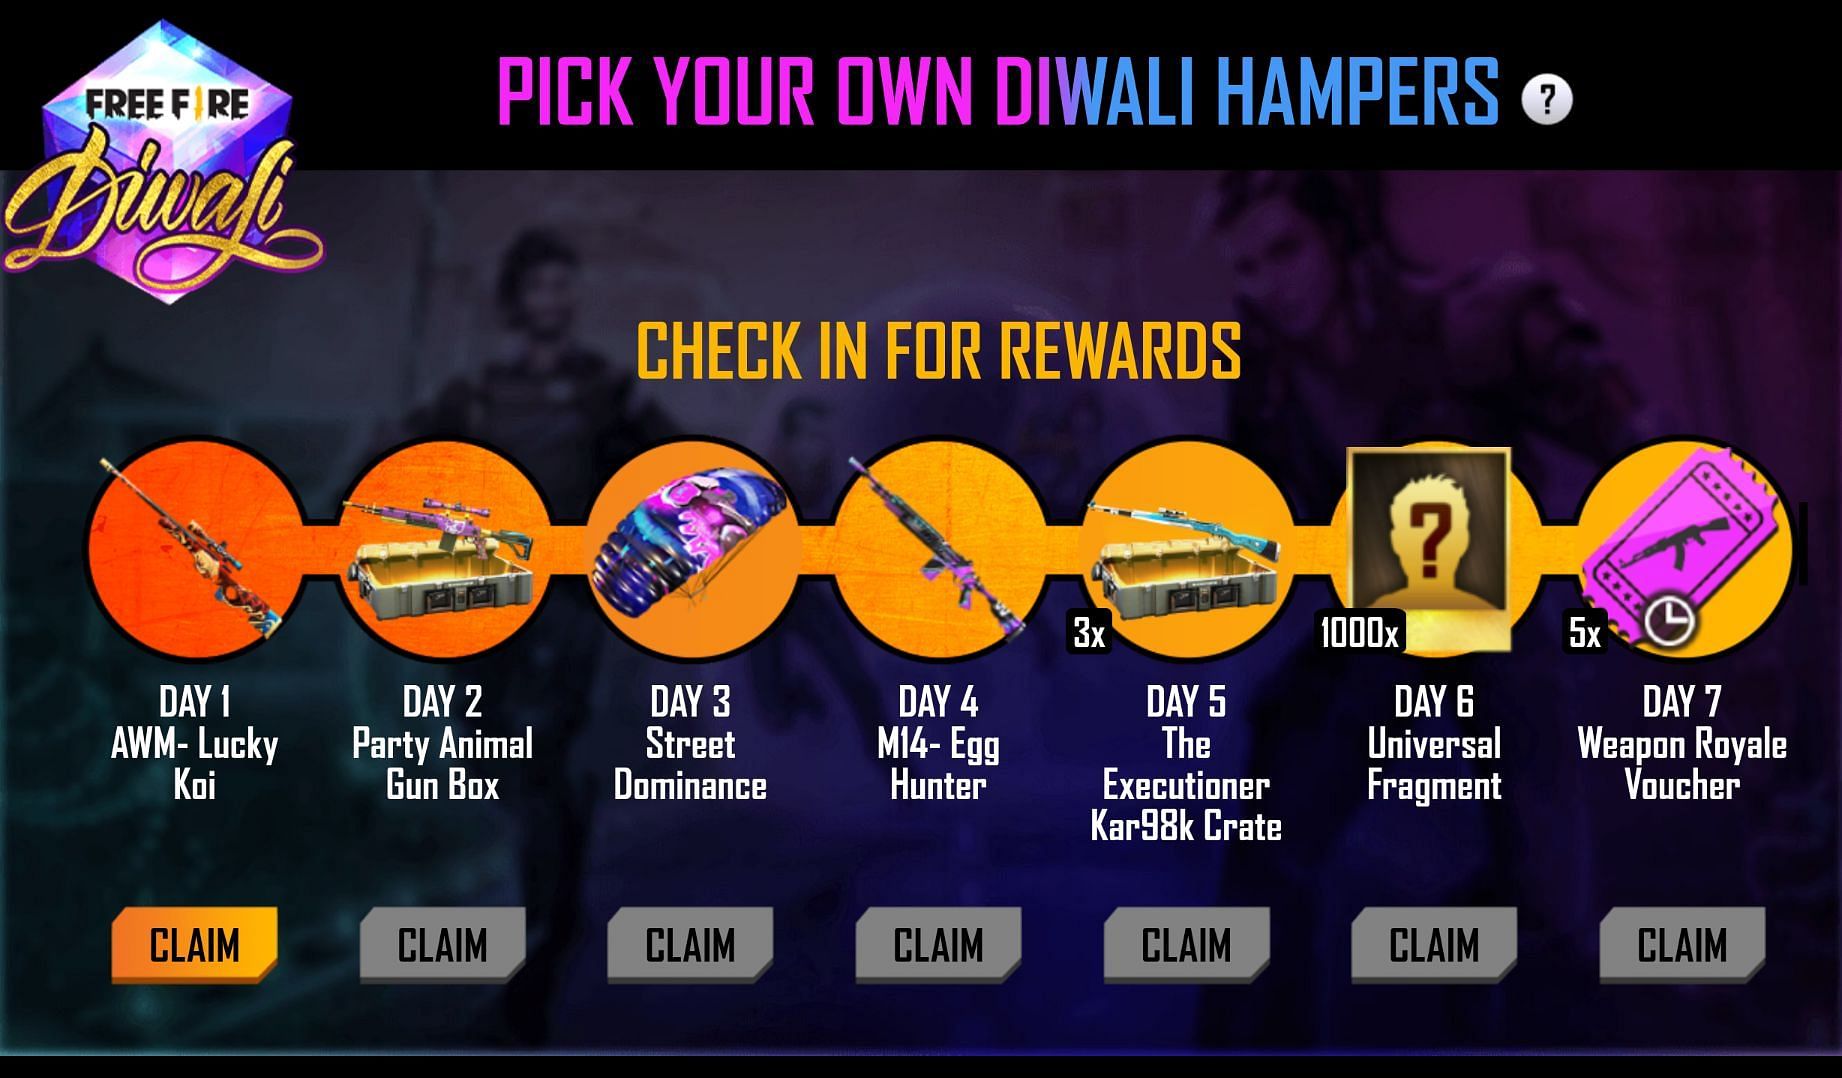 They can sign in daily to get the items (Image via Free Fire)